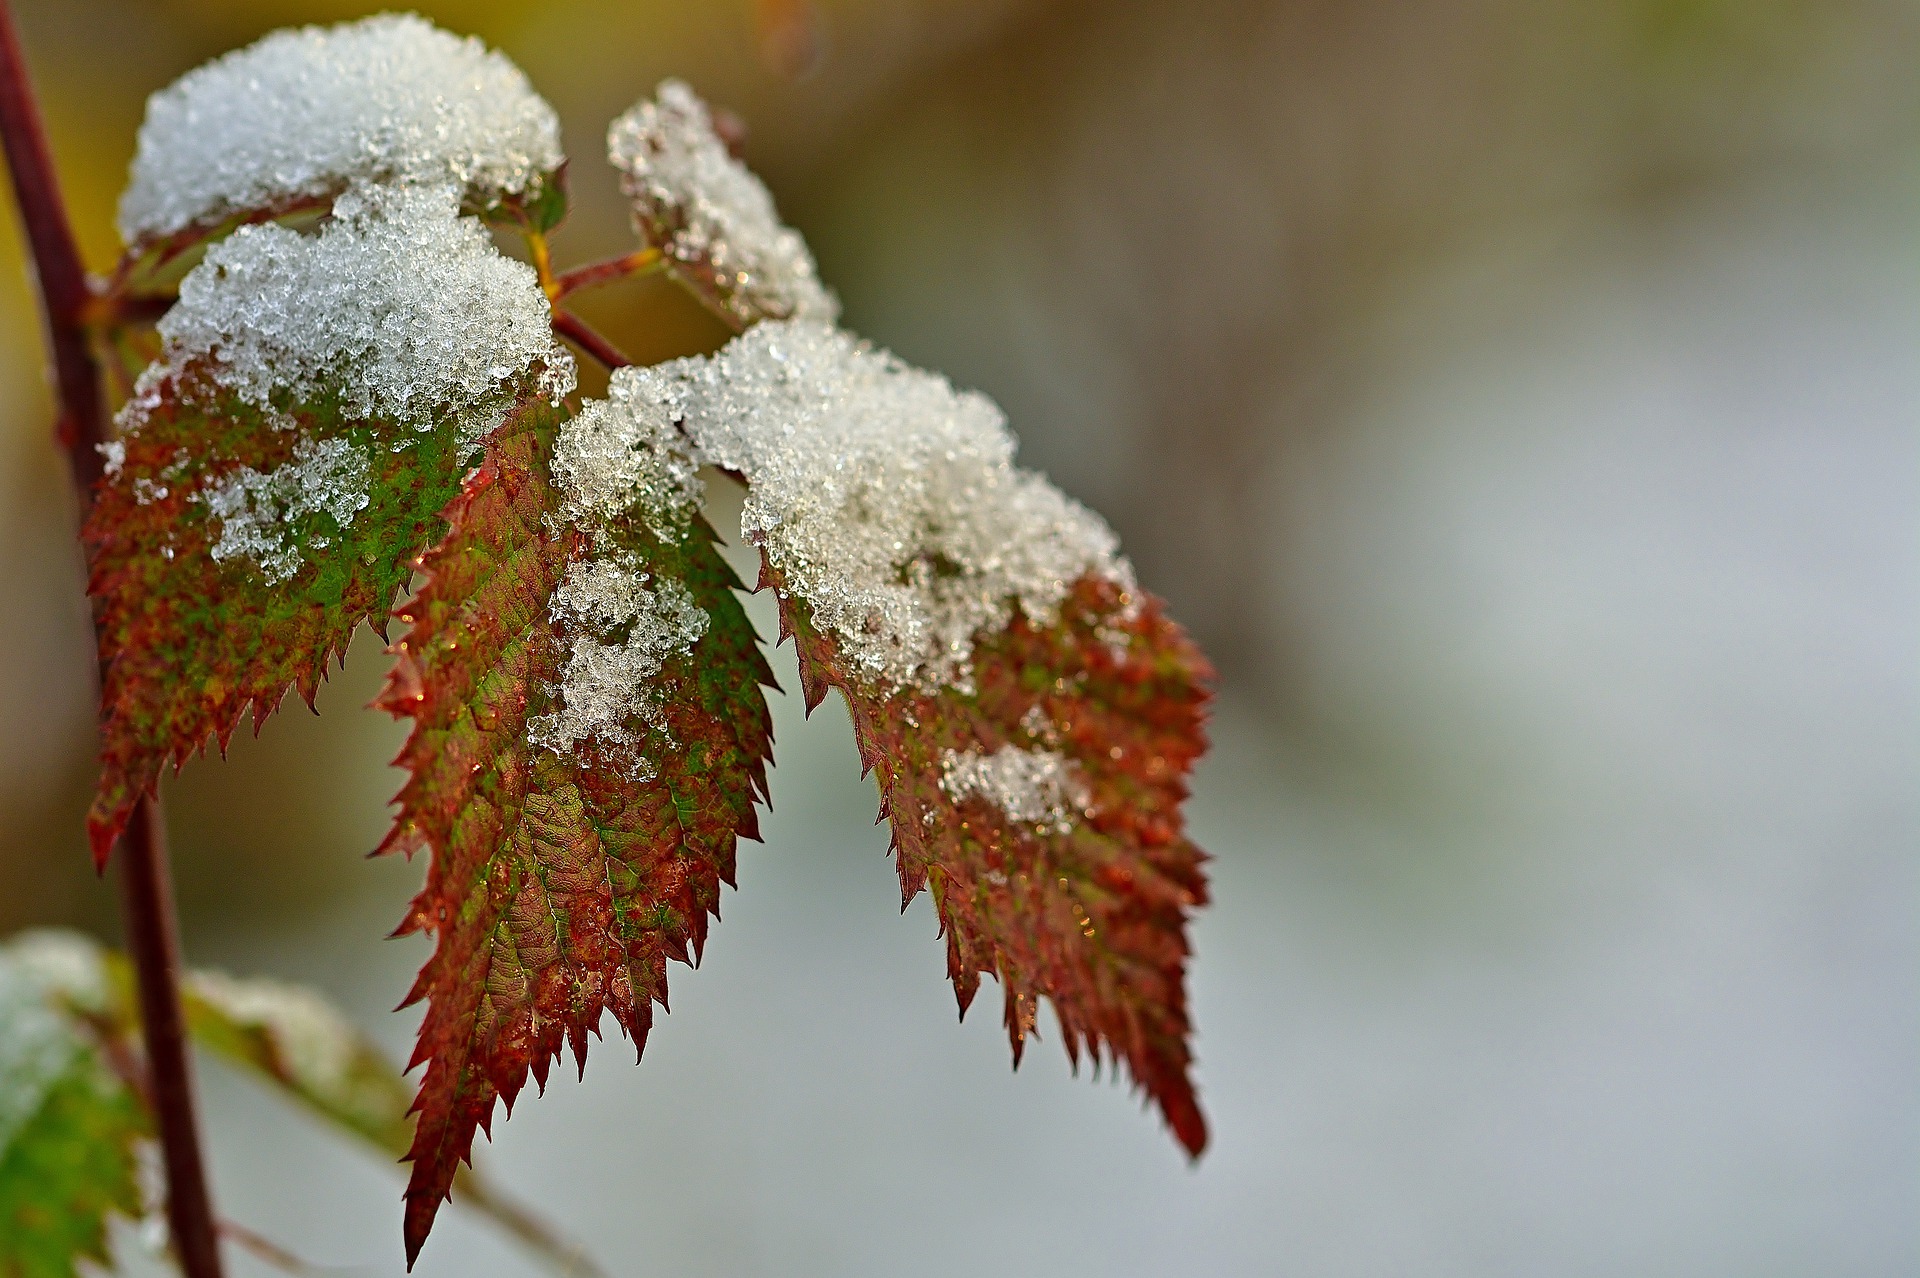 Blackberry leaves covered with snow